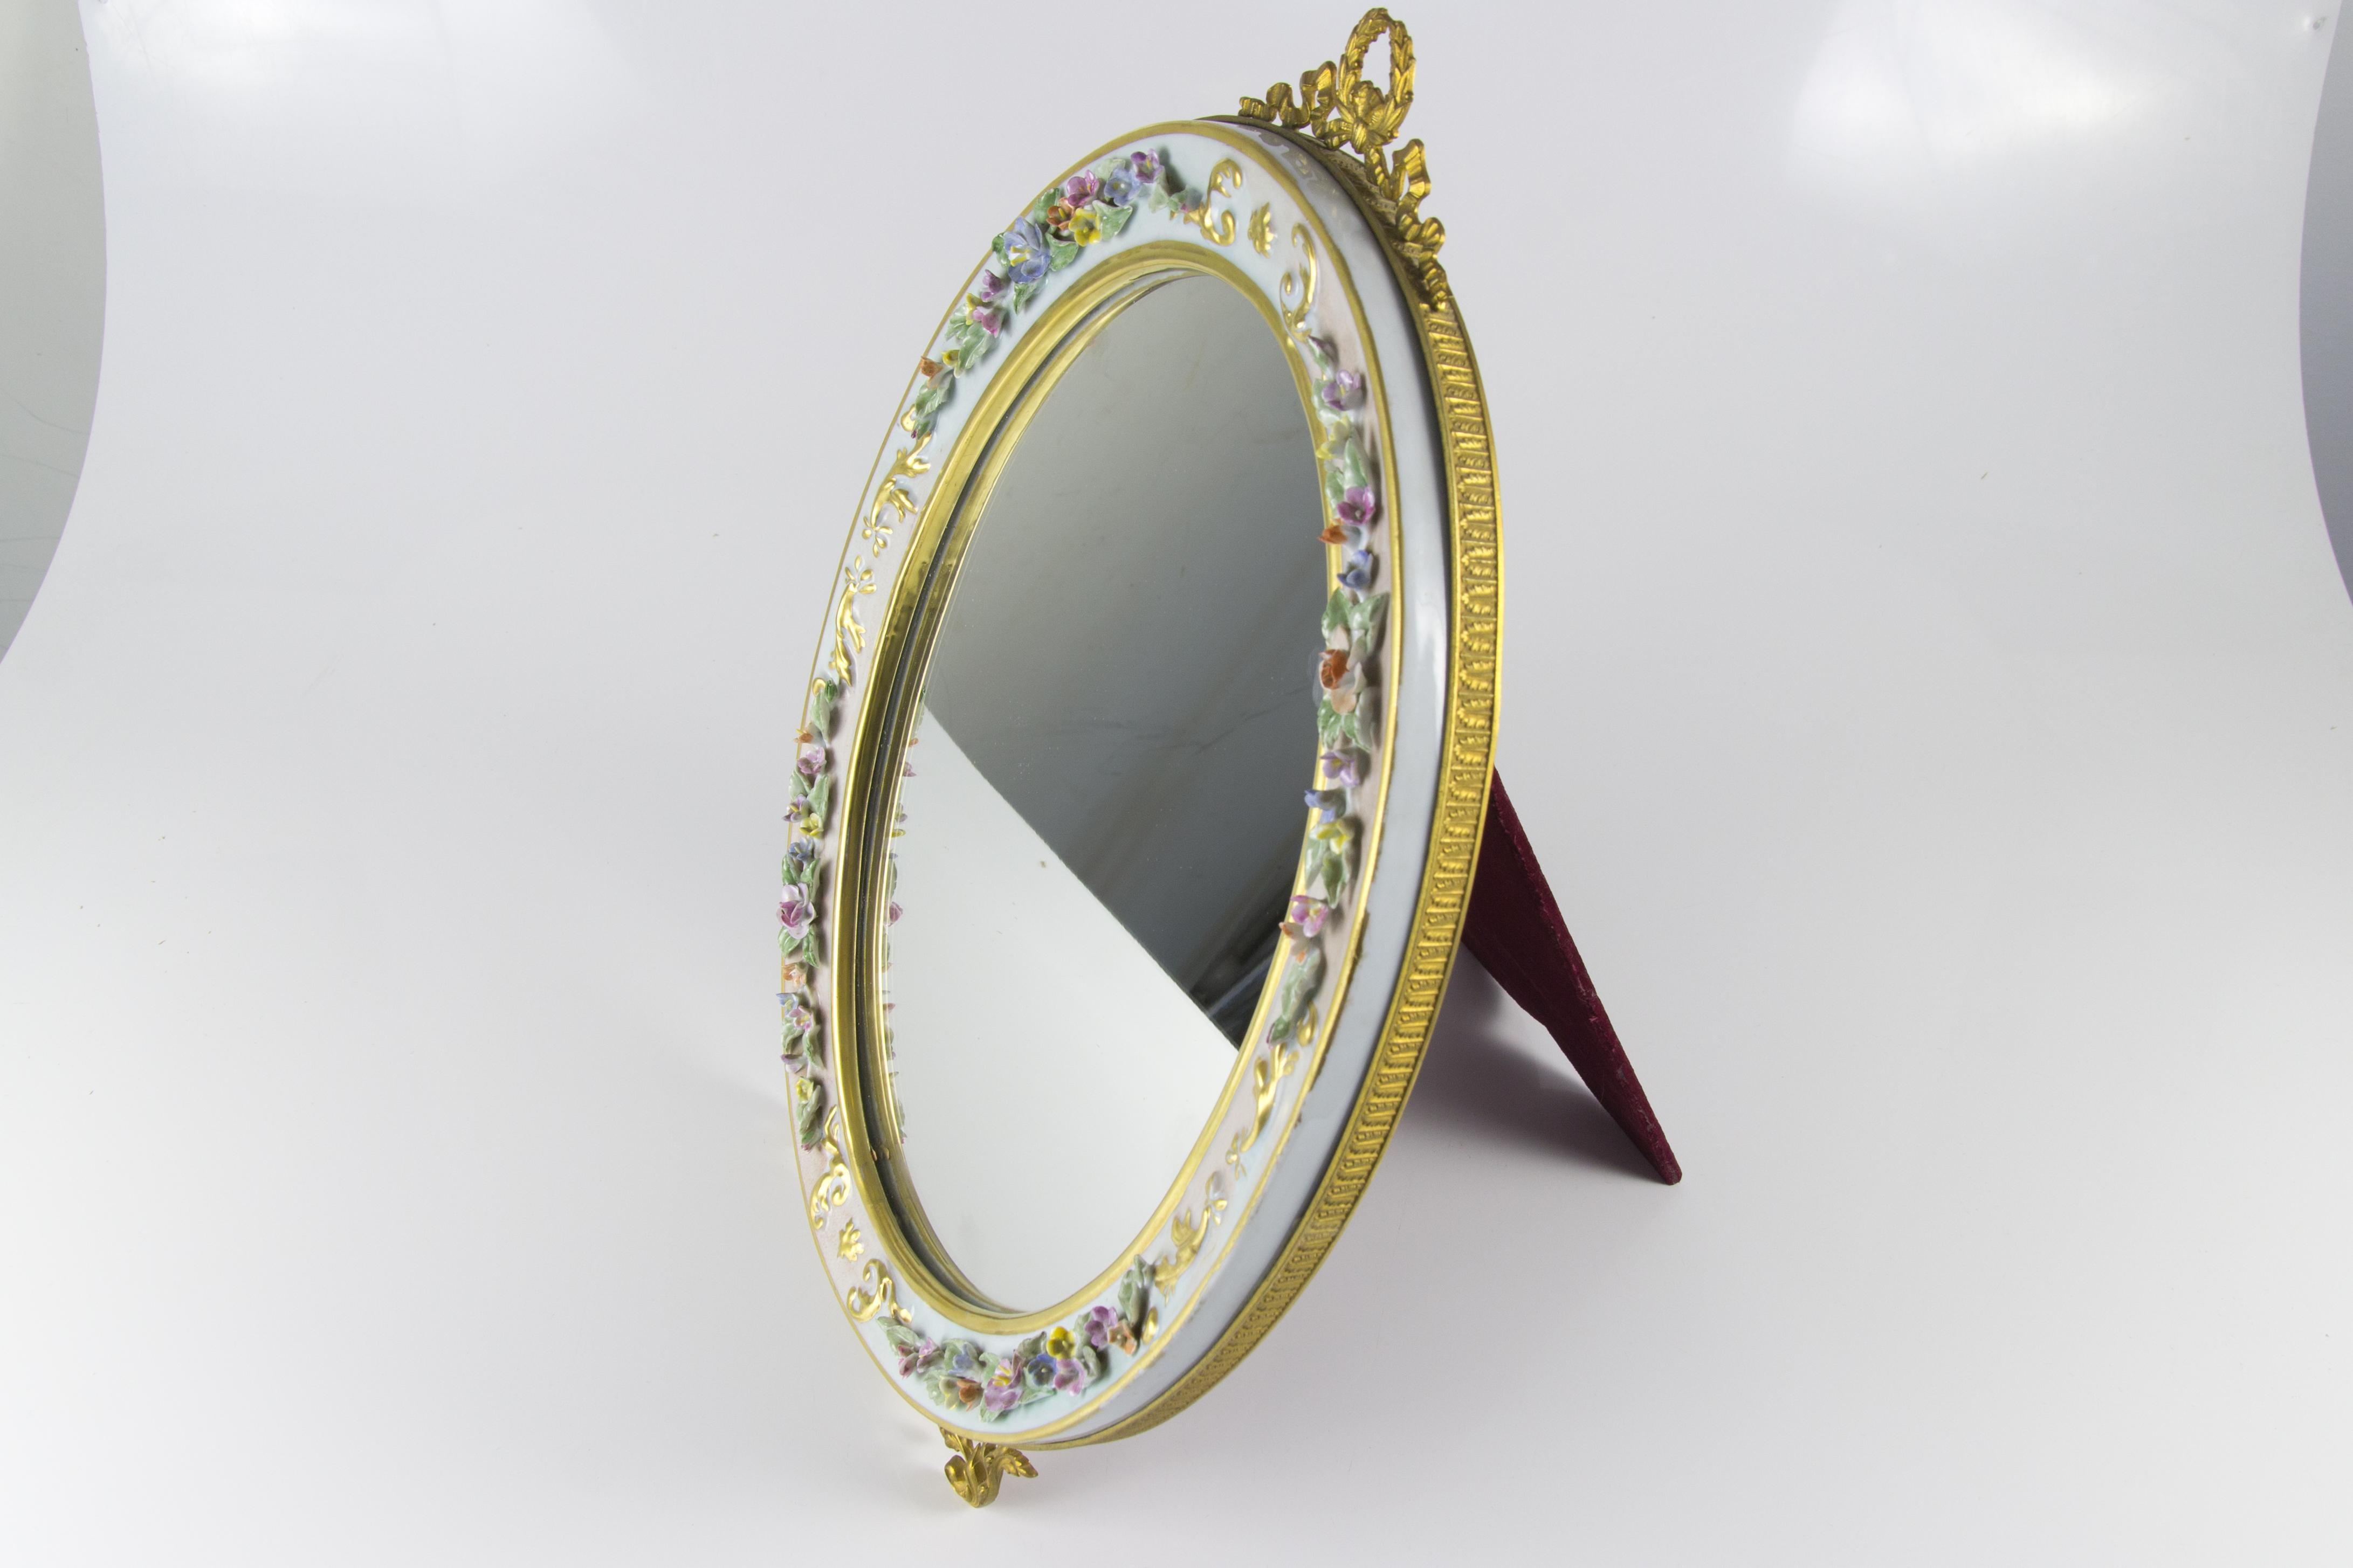 Oval Table Mirror with Floral Porcelain Frame, Italy, 1950s For Sale 9